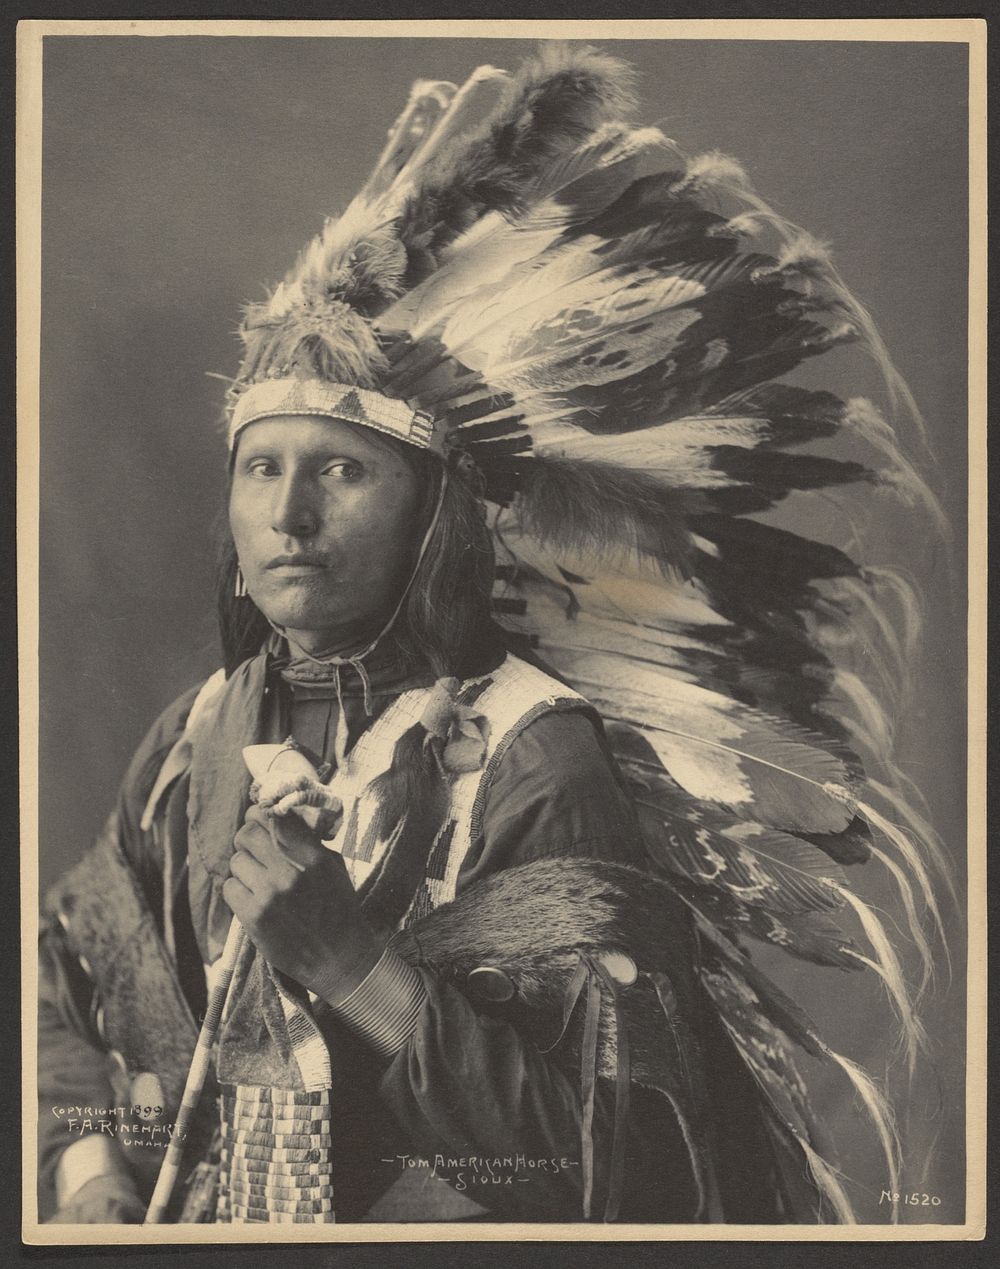 Tom American Horse, Sioux by Adolph F Muhr and Frank A Rinehart